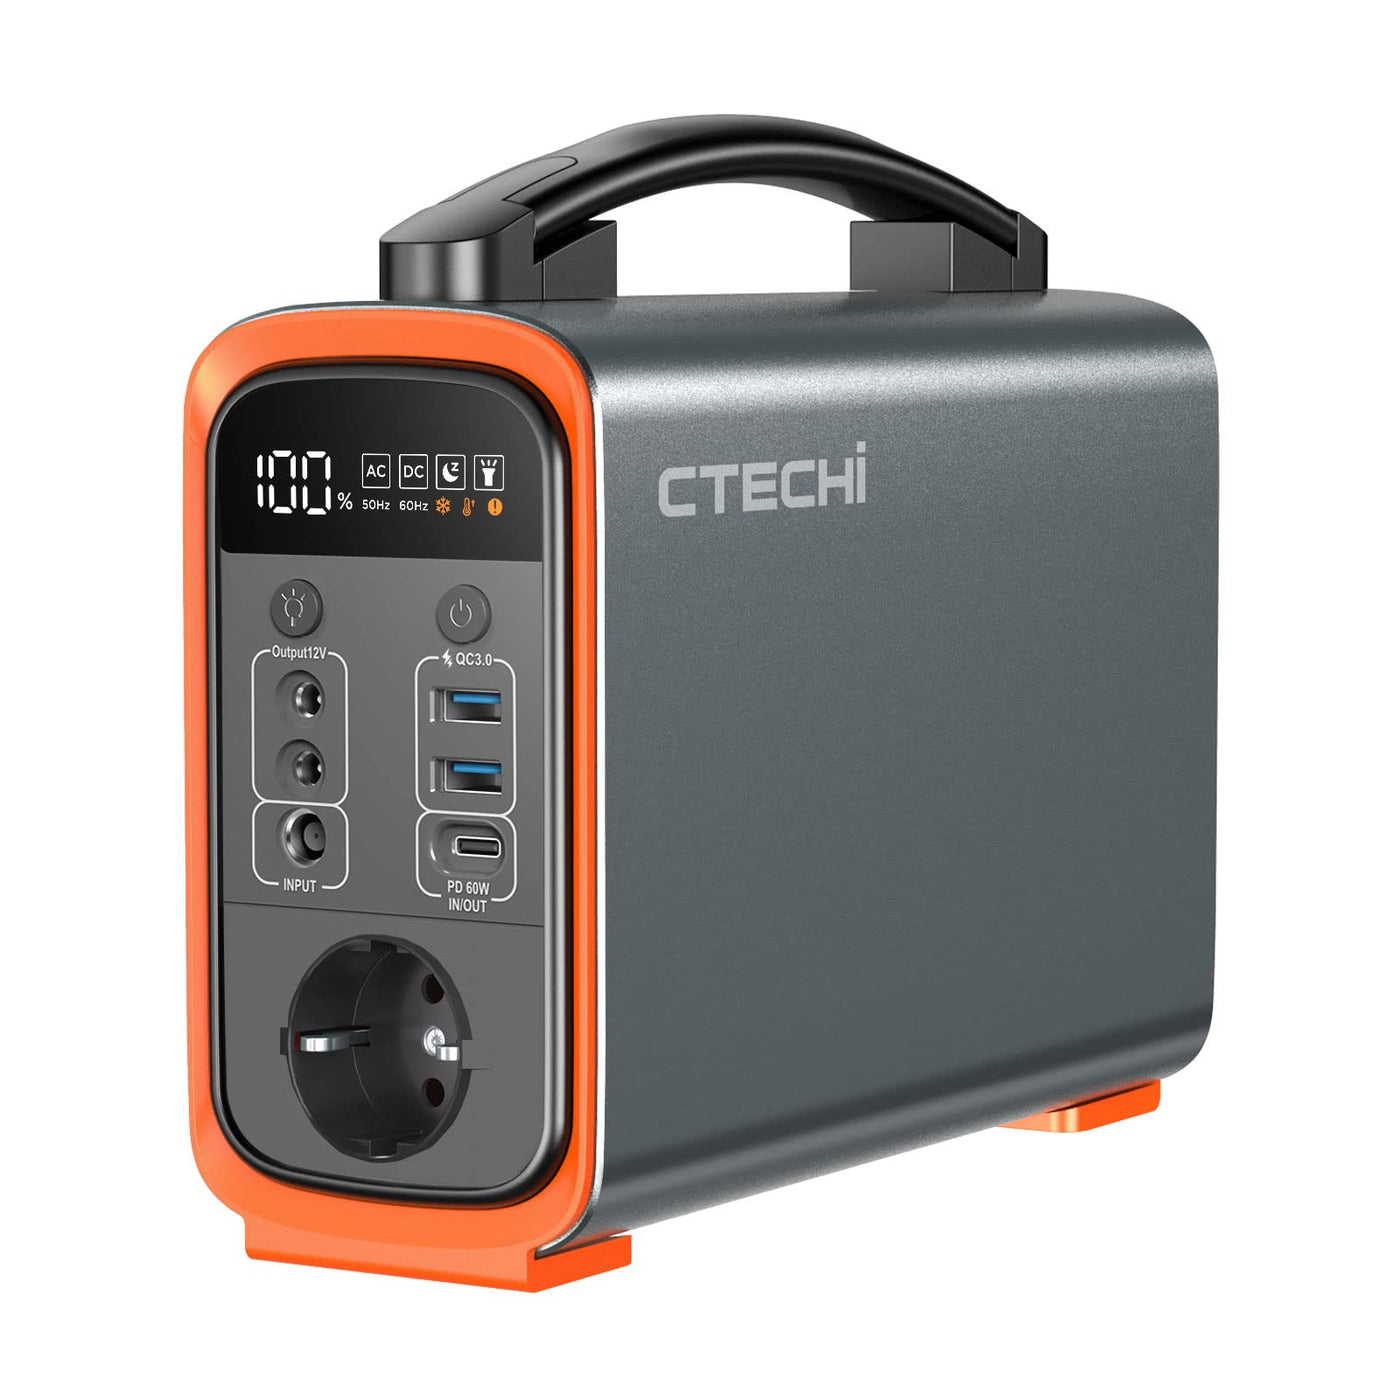 【Update Version】 CTECHi GT200 Portable Power Station 240W / 240Wh LiFePO4 Battery